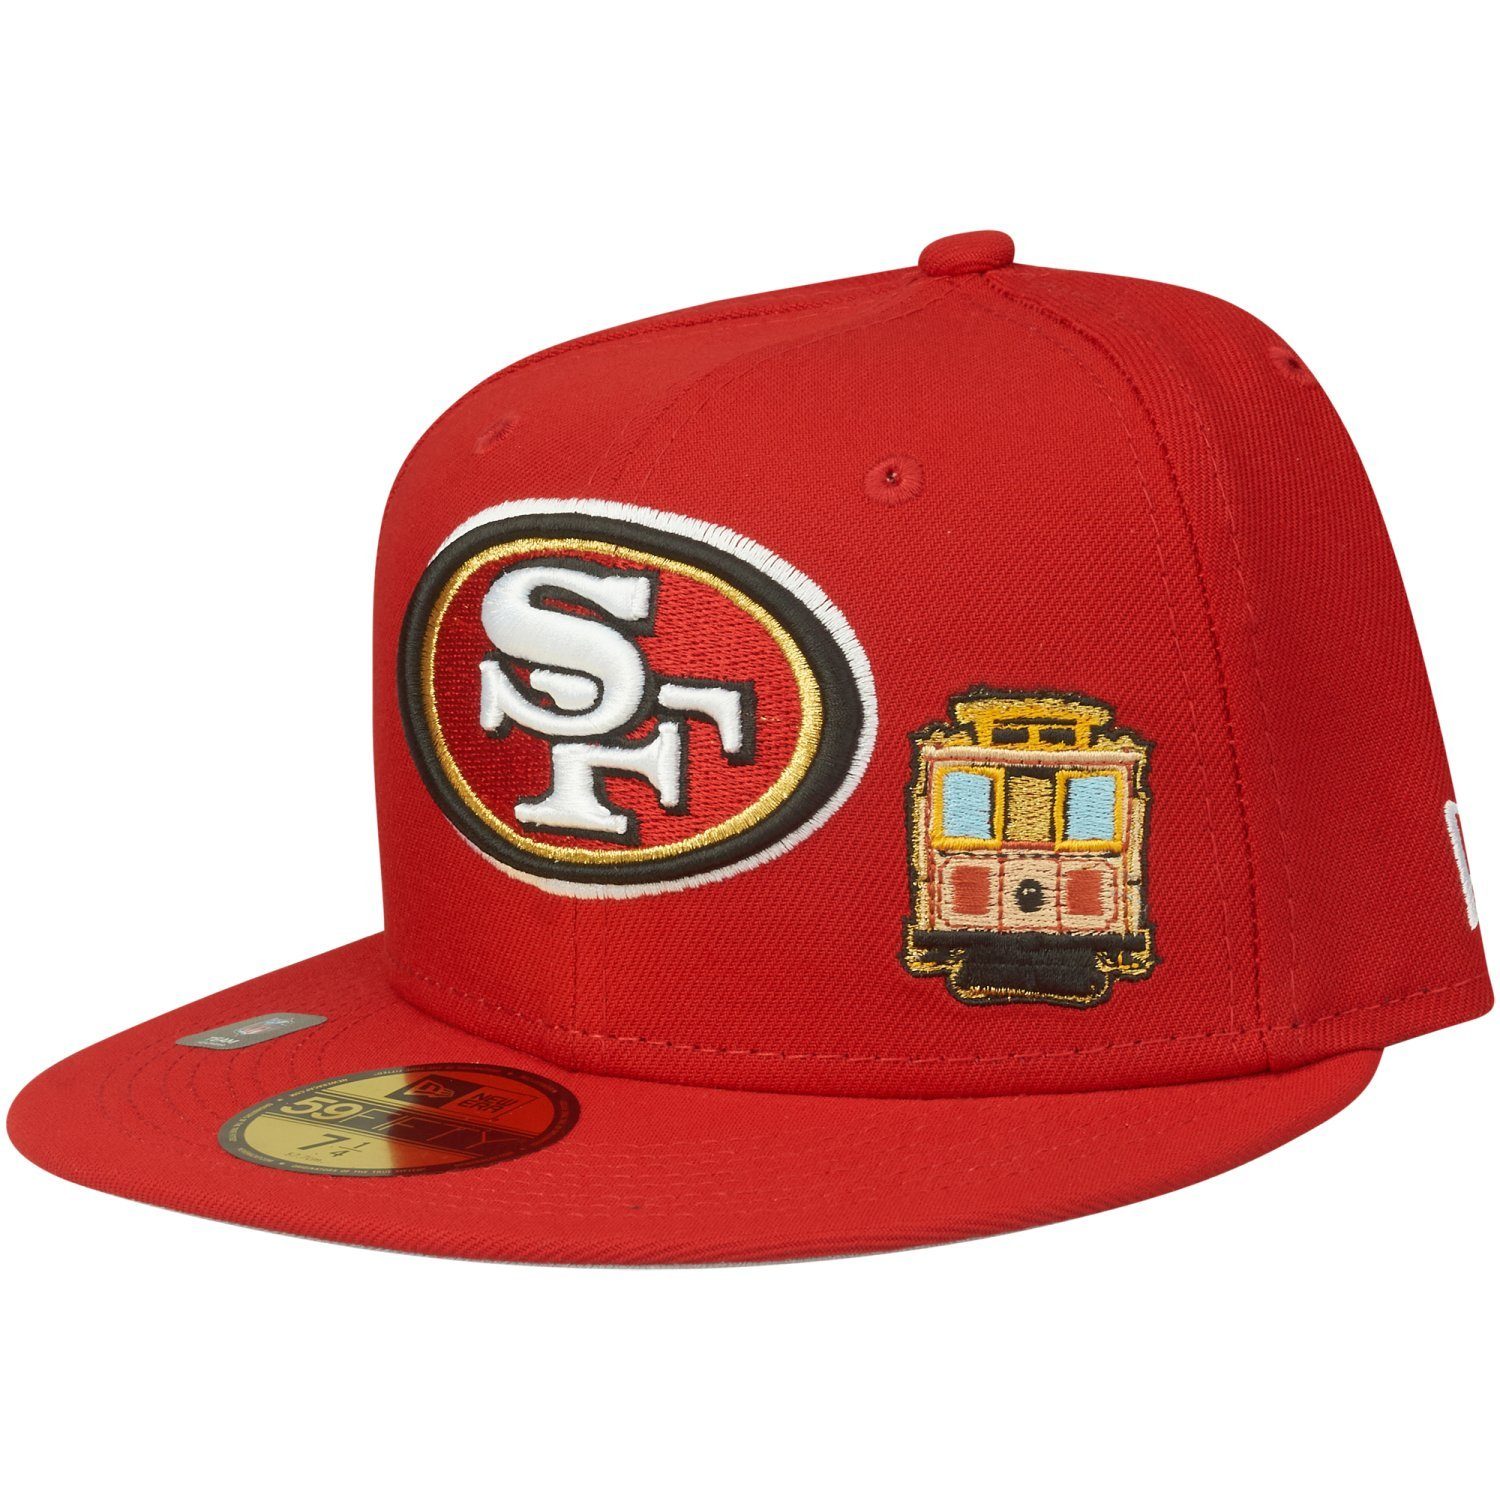 CITY 49ers Francisco Era 59Fifty Cap New San NFL Fitted